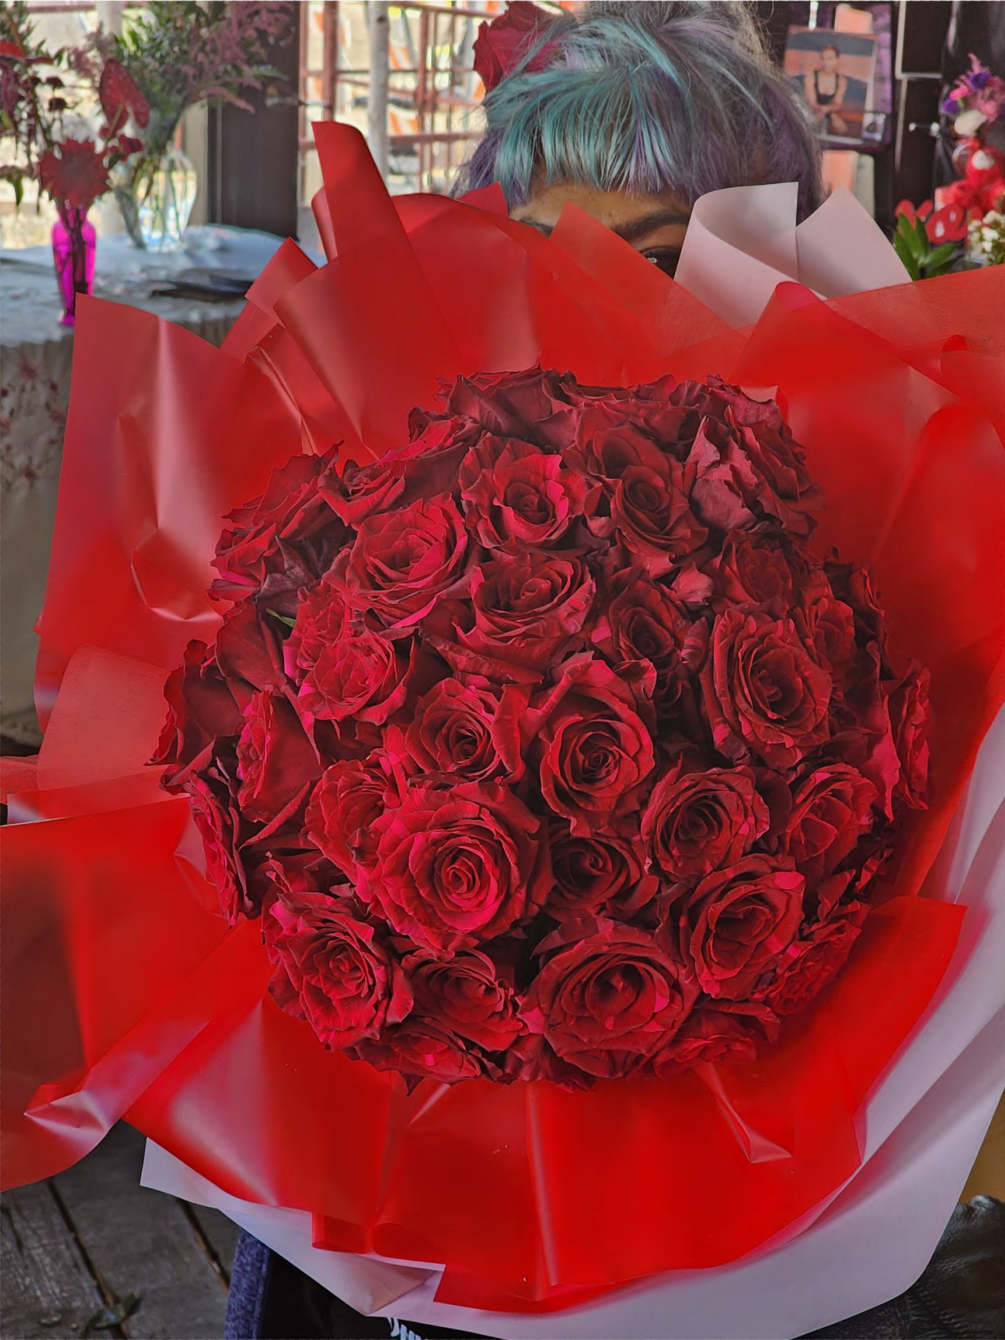 50 Red Roses wrapped - &quot;Unconditional Love.&quot;
Deluxe - 99 Roses - &quot;I